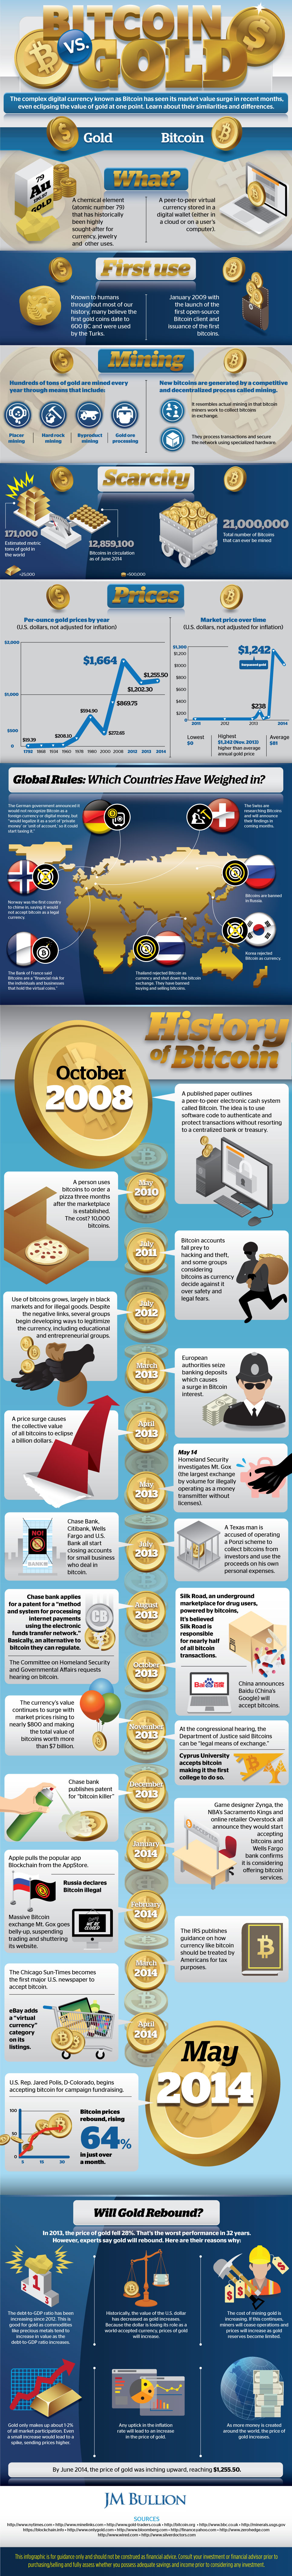 bitcoin-vs-gold-infographic